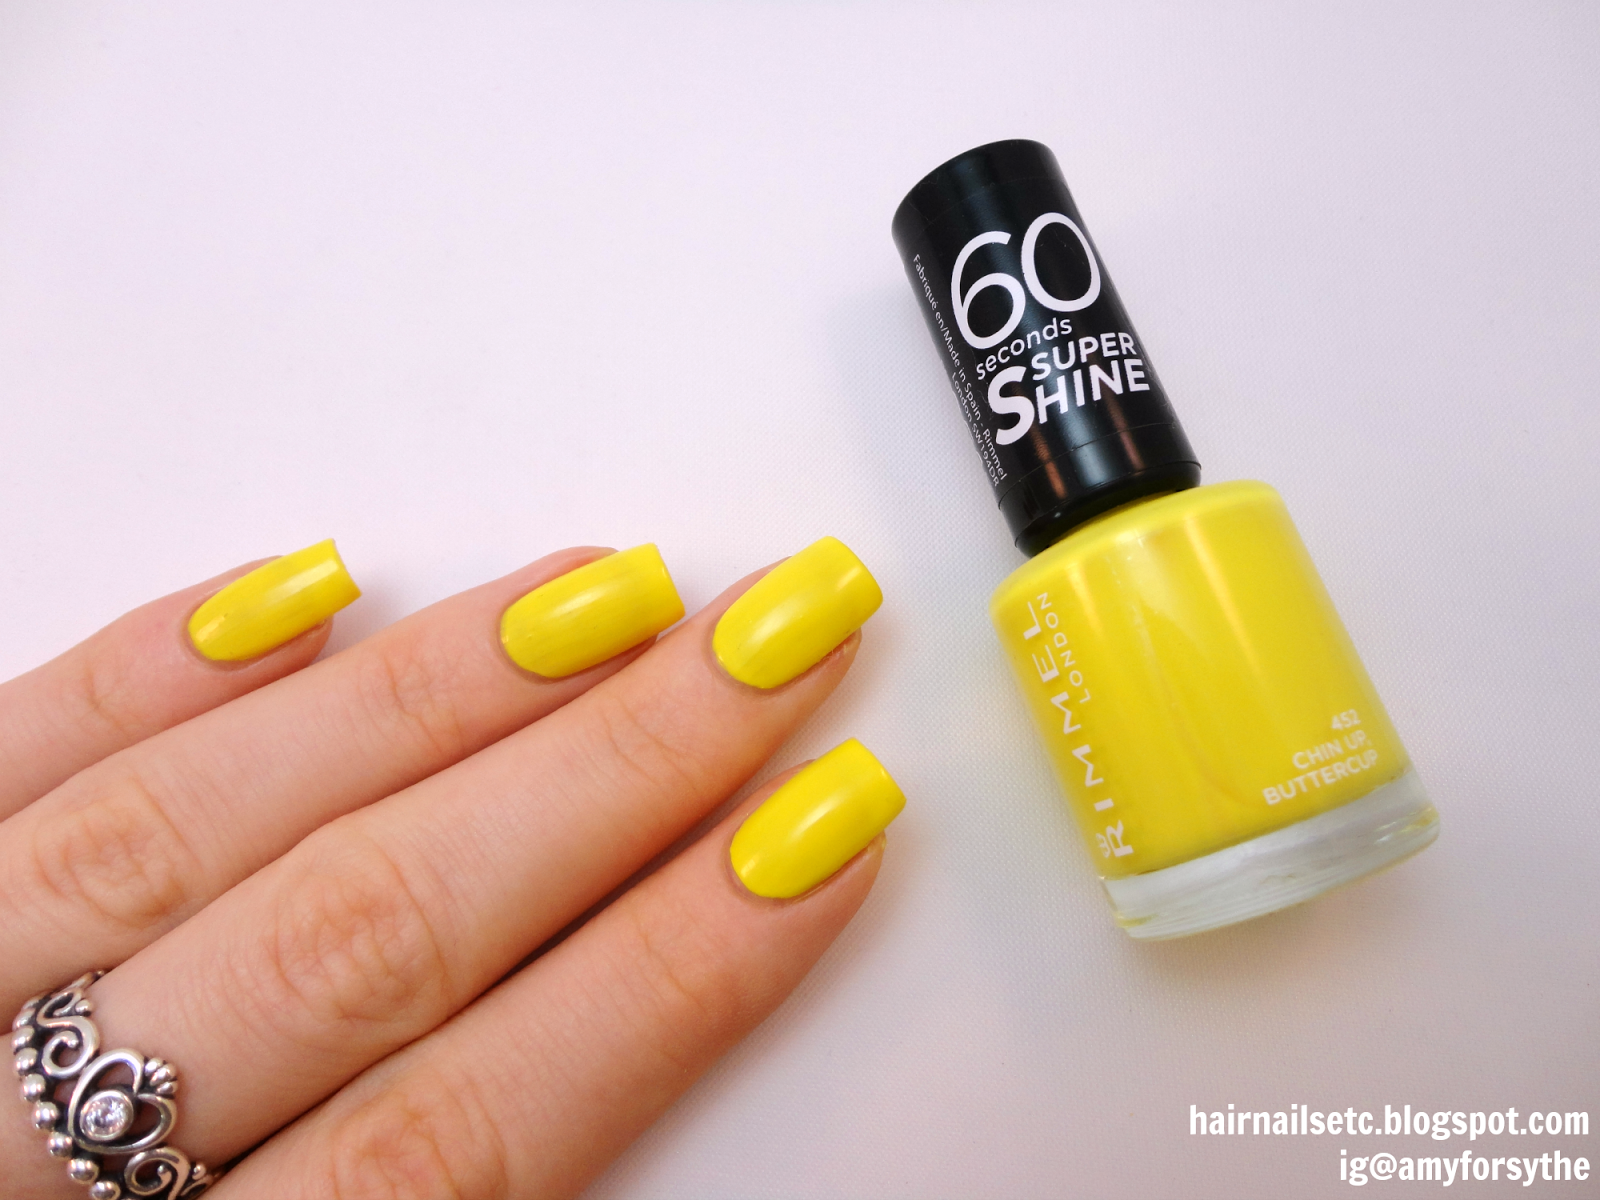 Rimmel New 60 Seconds Super Shine Nail Polish in Chin Up Buttercup Swatch and Review - hairnailsetc.blogspot.co.uk / instagram.com/amyforsythe